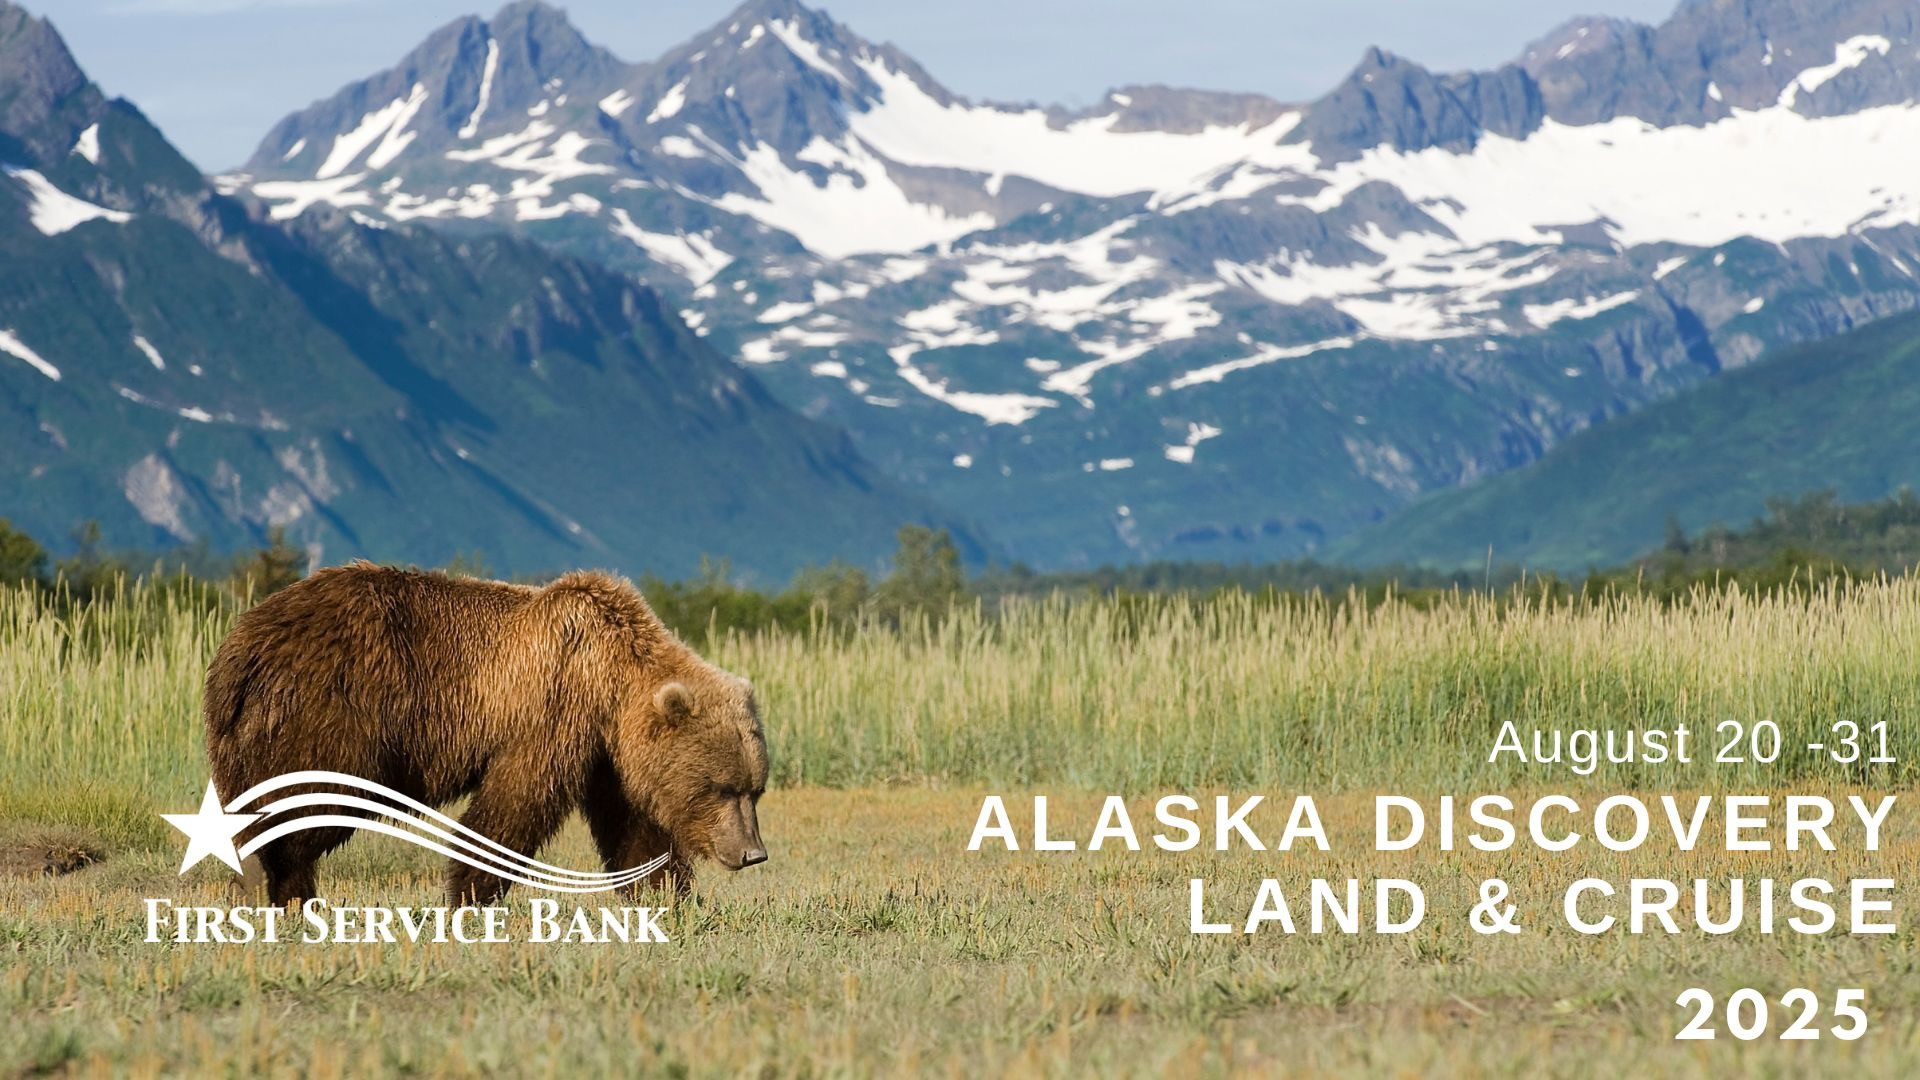 Alaska Discovery Land & Cruise  August 20-31, 2025